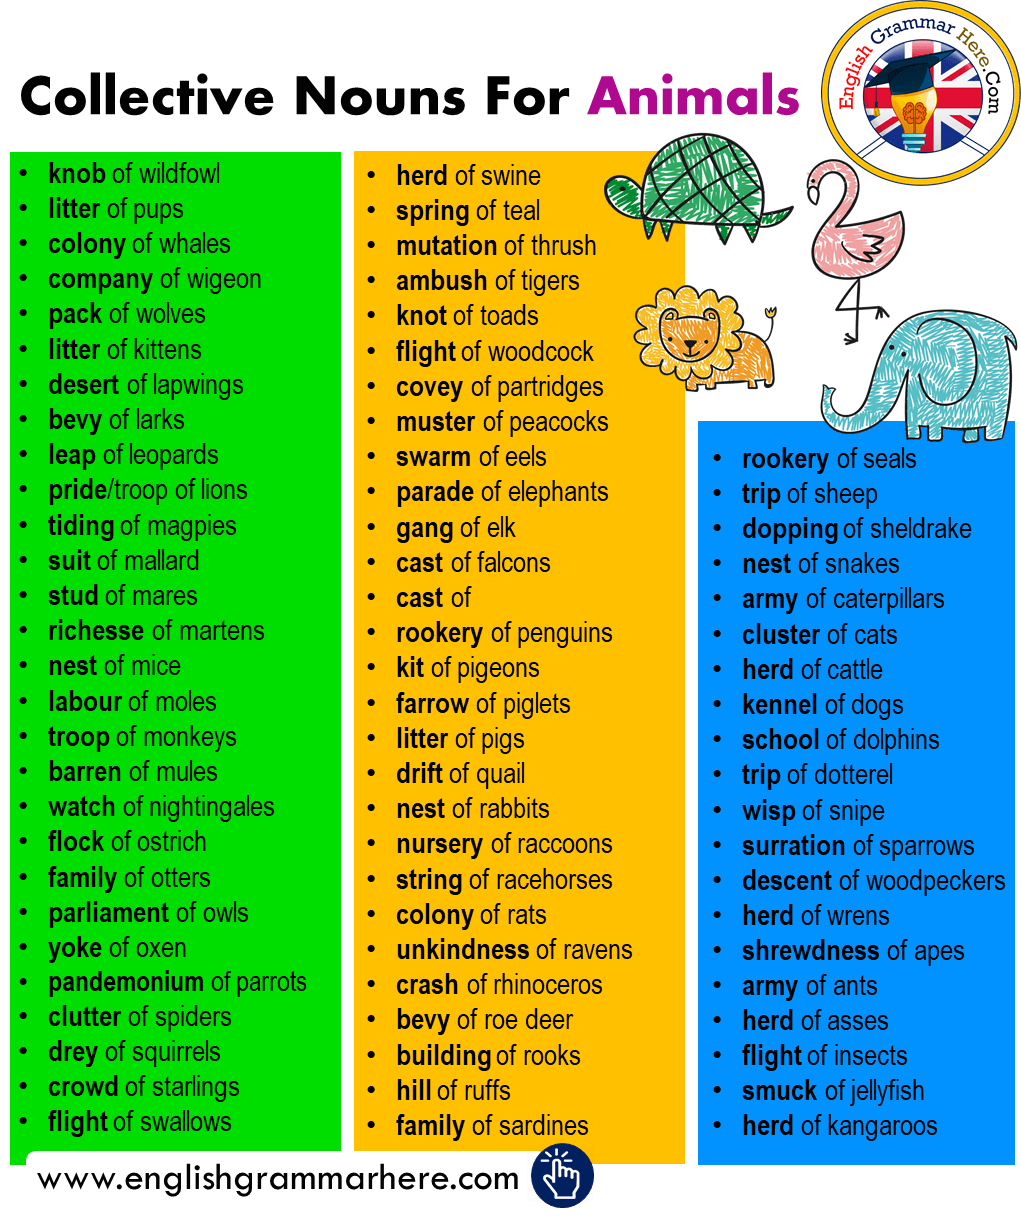 Collective Nouns For Animals in English